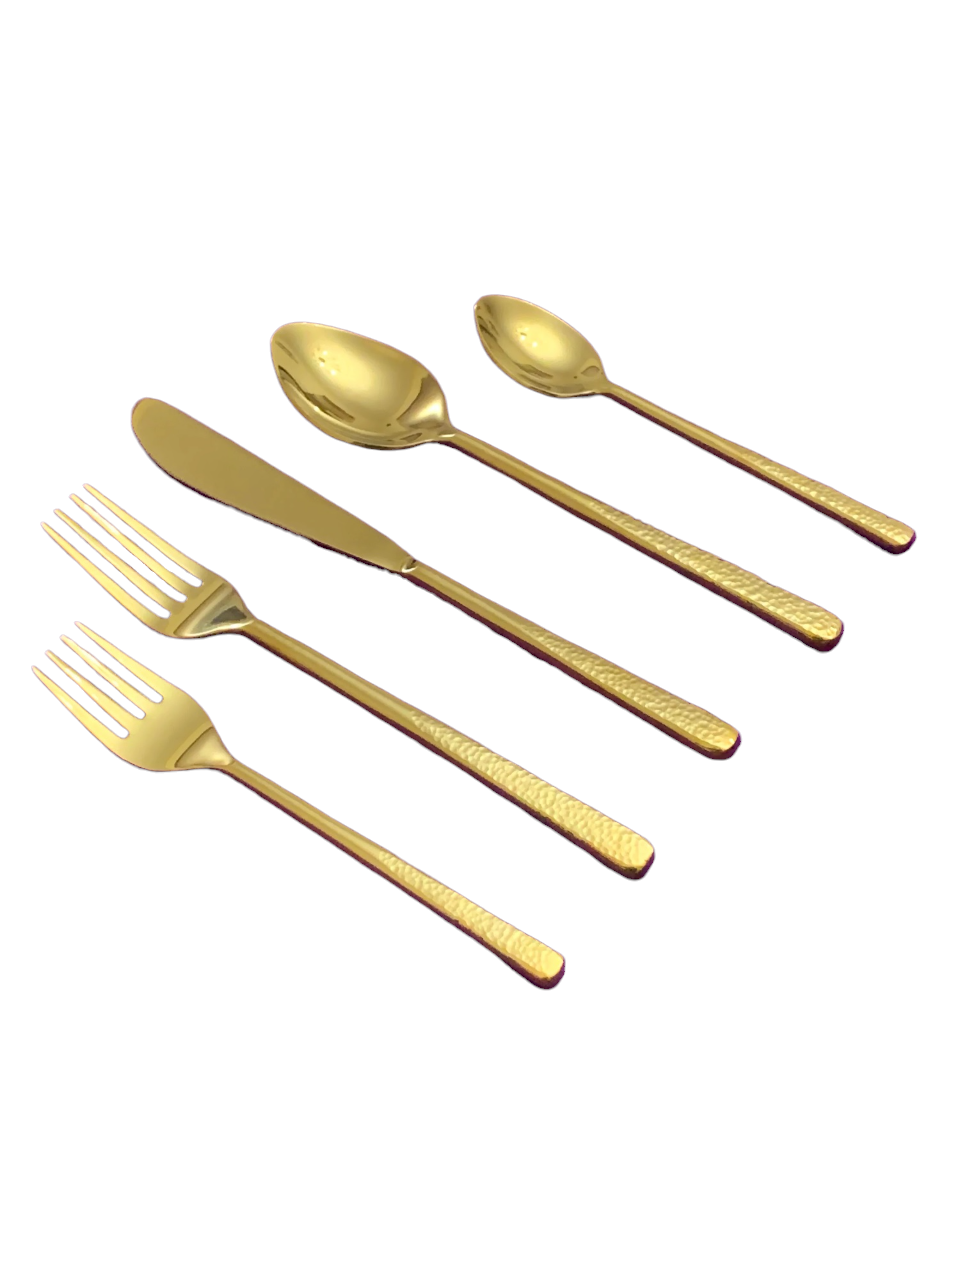 Brass/Gold Cooking Utensils Set for Modern Cooking and Serving - 5 PC  Dishwasher Safe Stainless Steel Gold Utensils Set - Serving Spoon, Ladle 